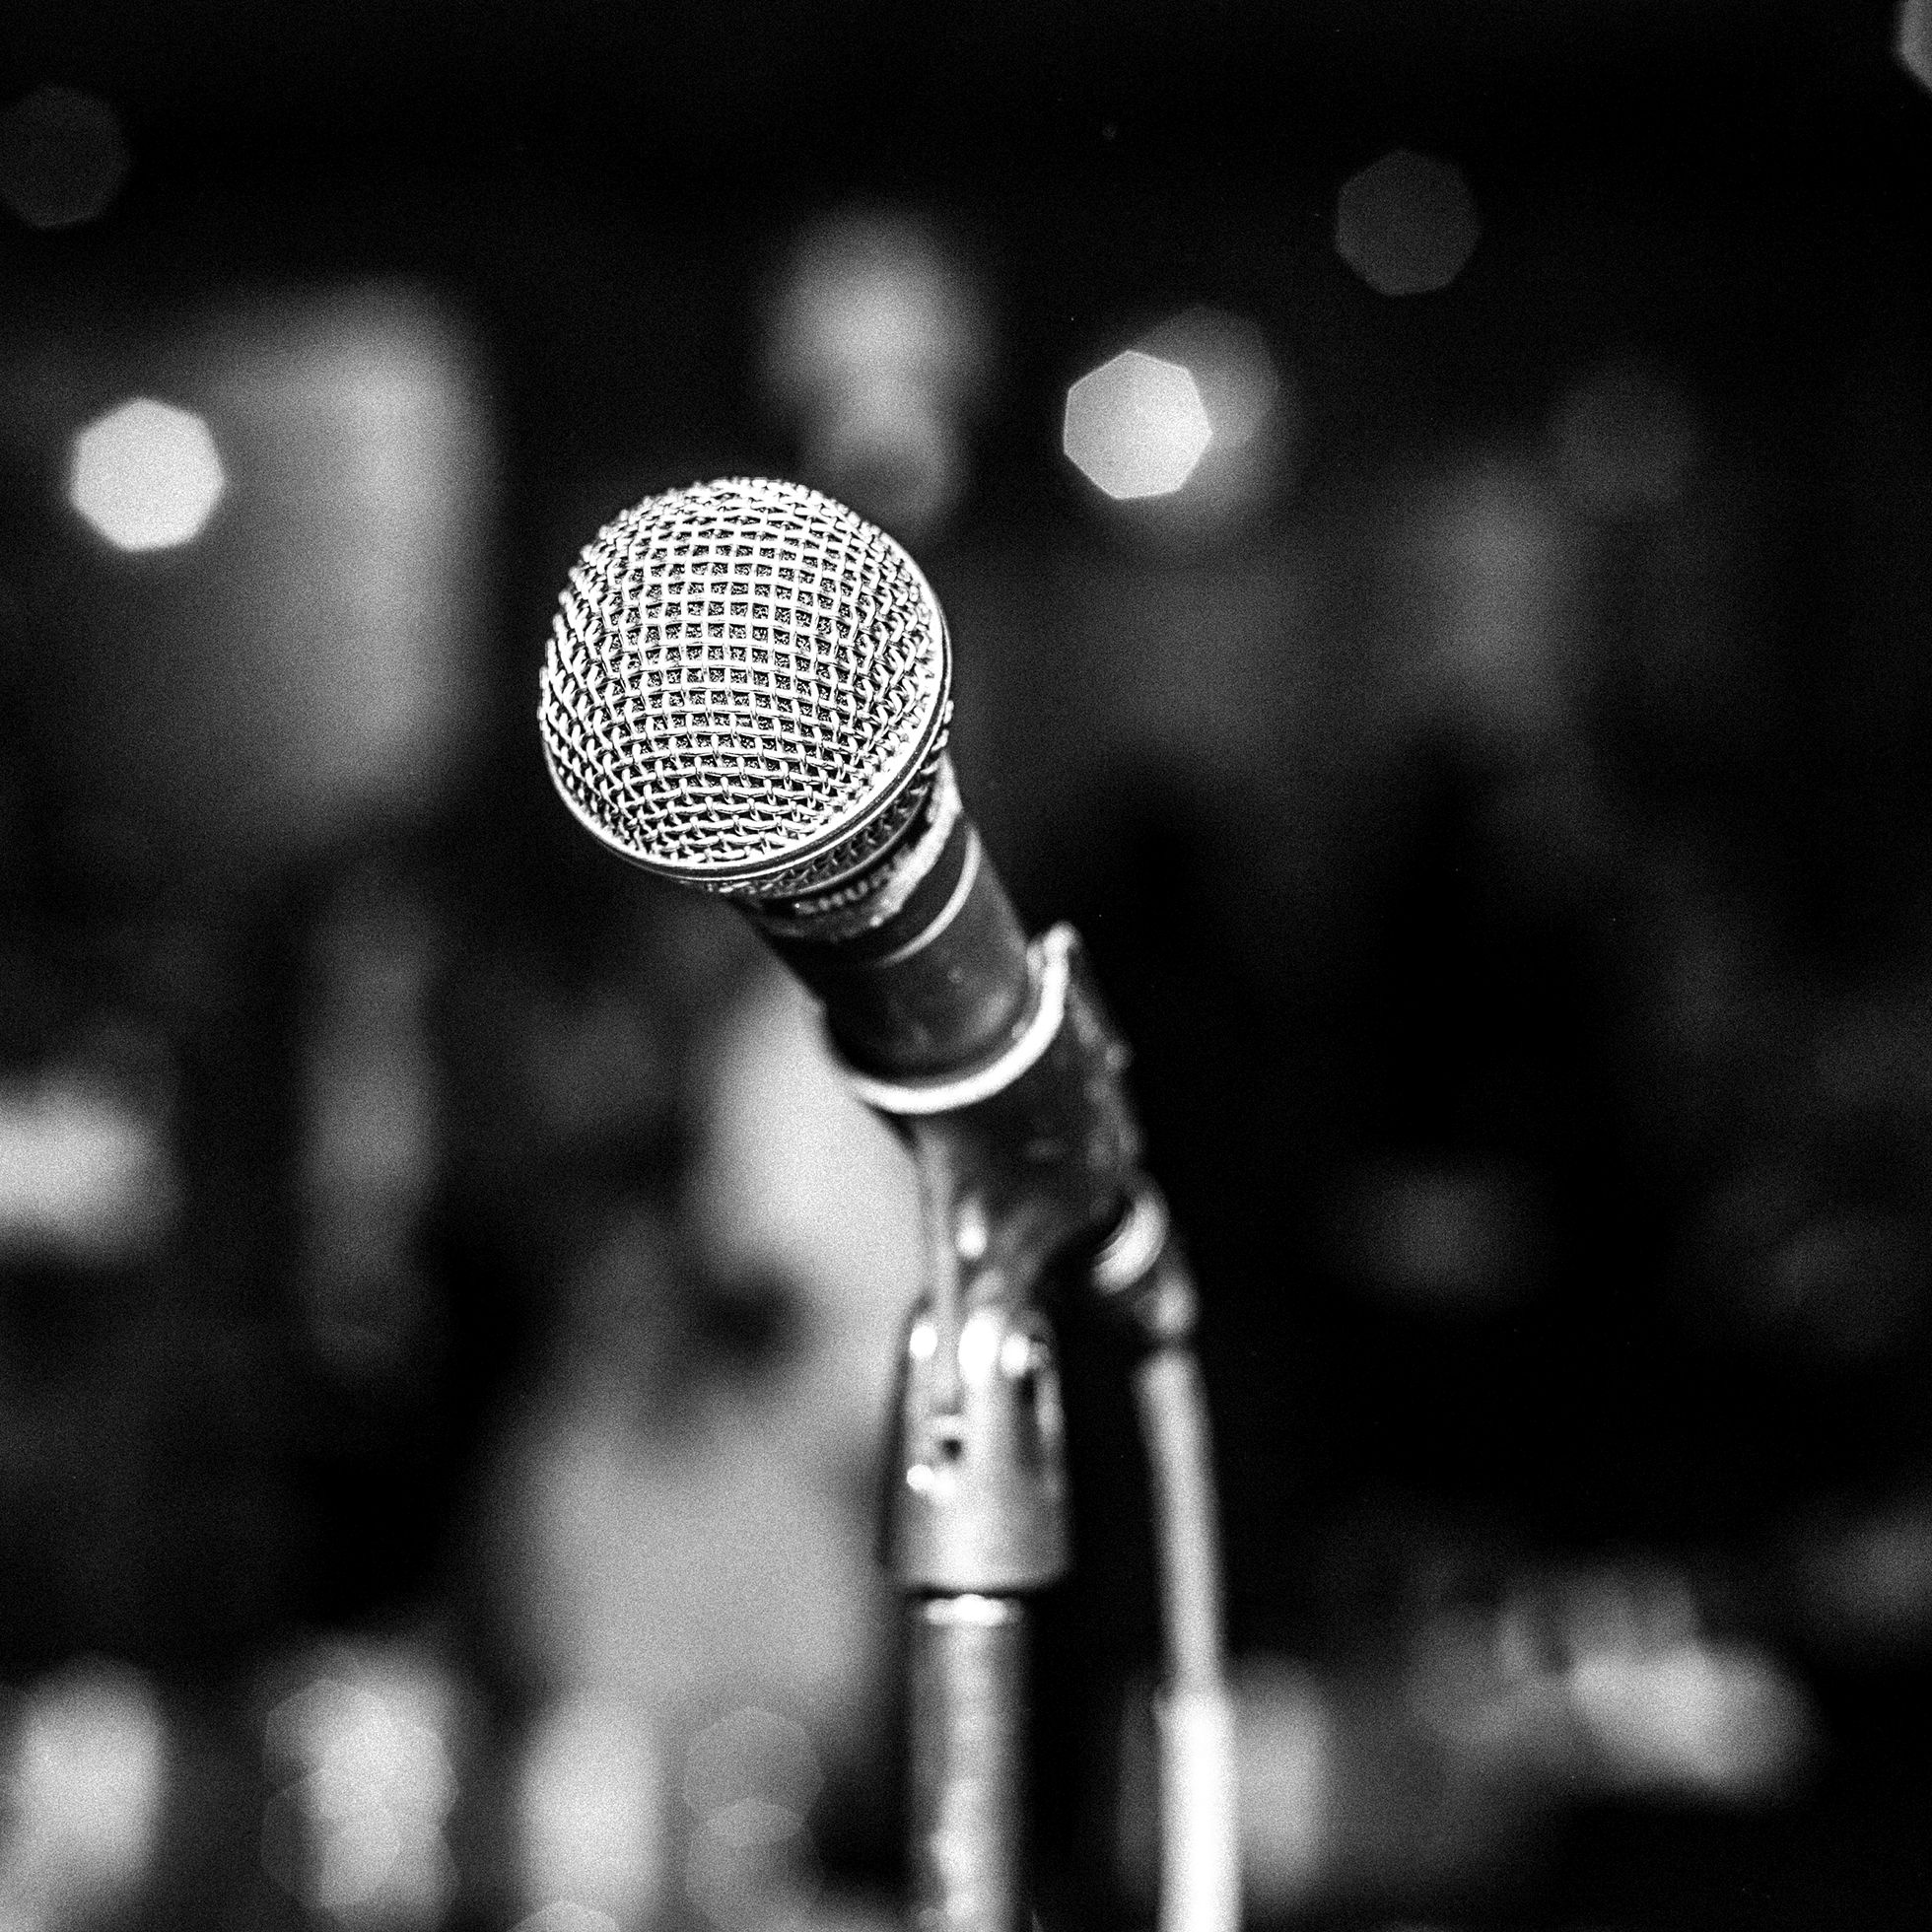 Close-up of a microphone on a stand from the stage side looking out into the room with the people and room blurred in the background.